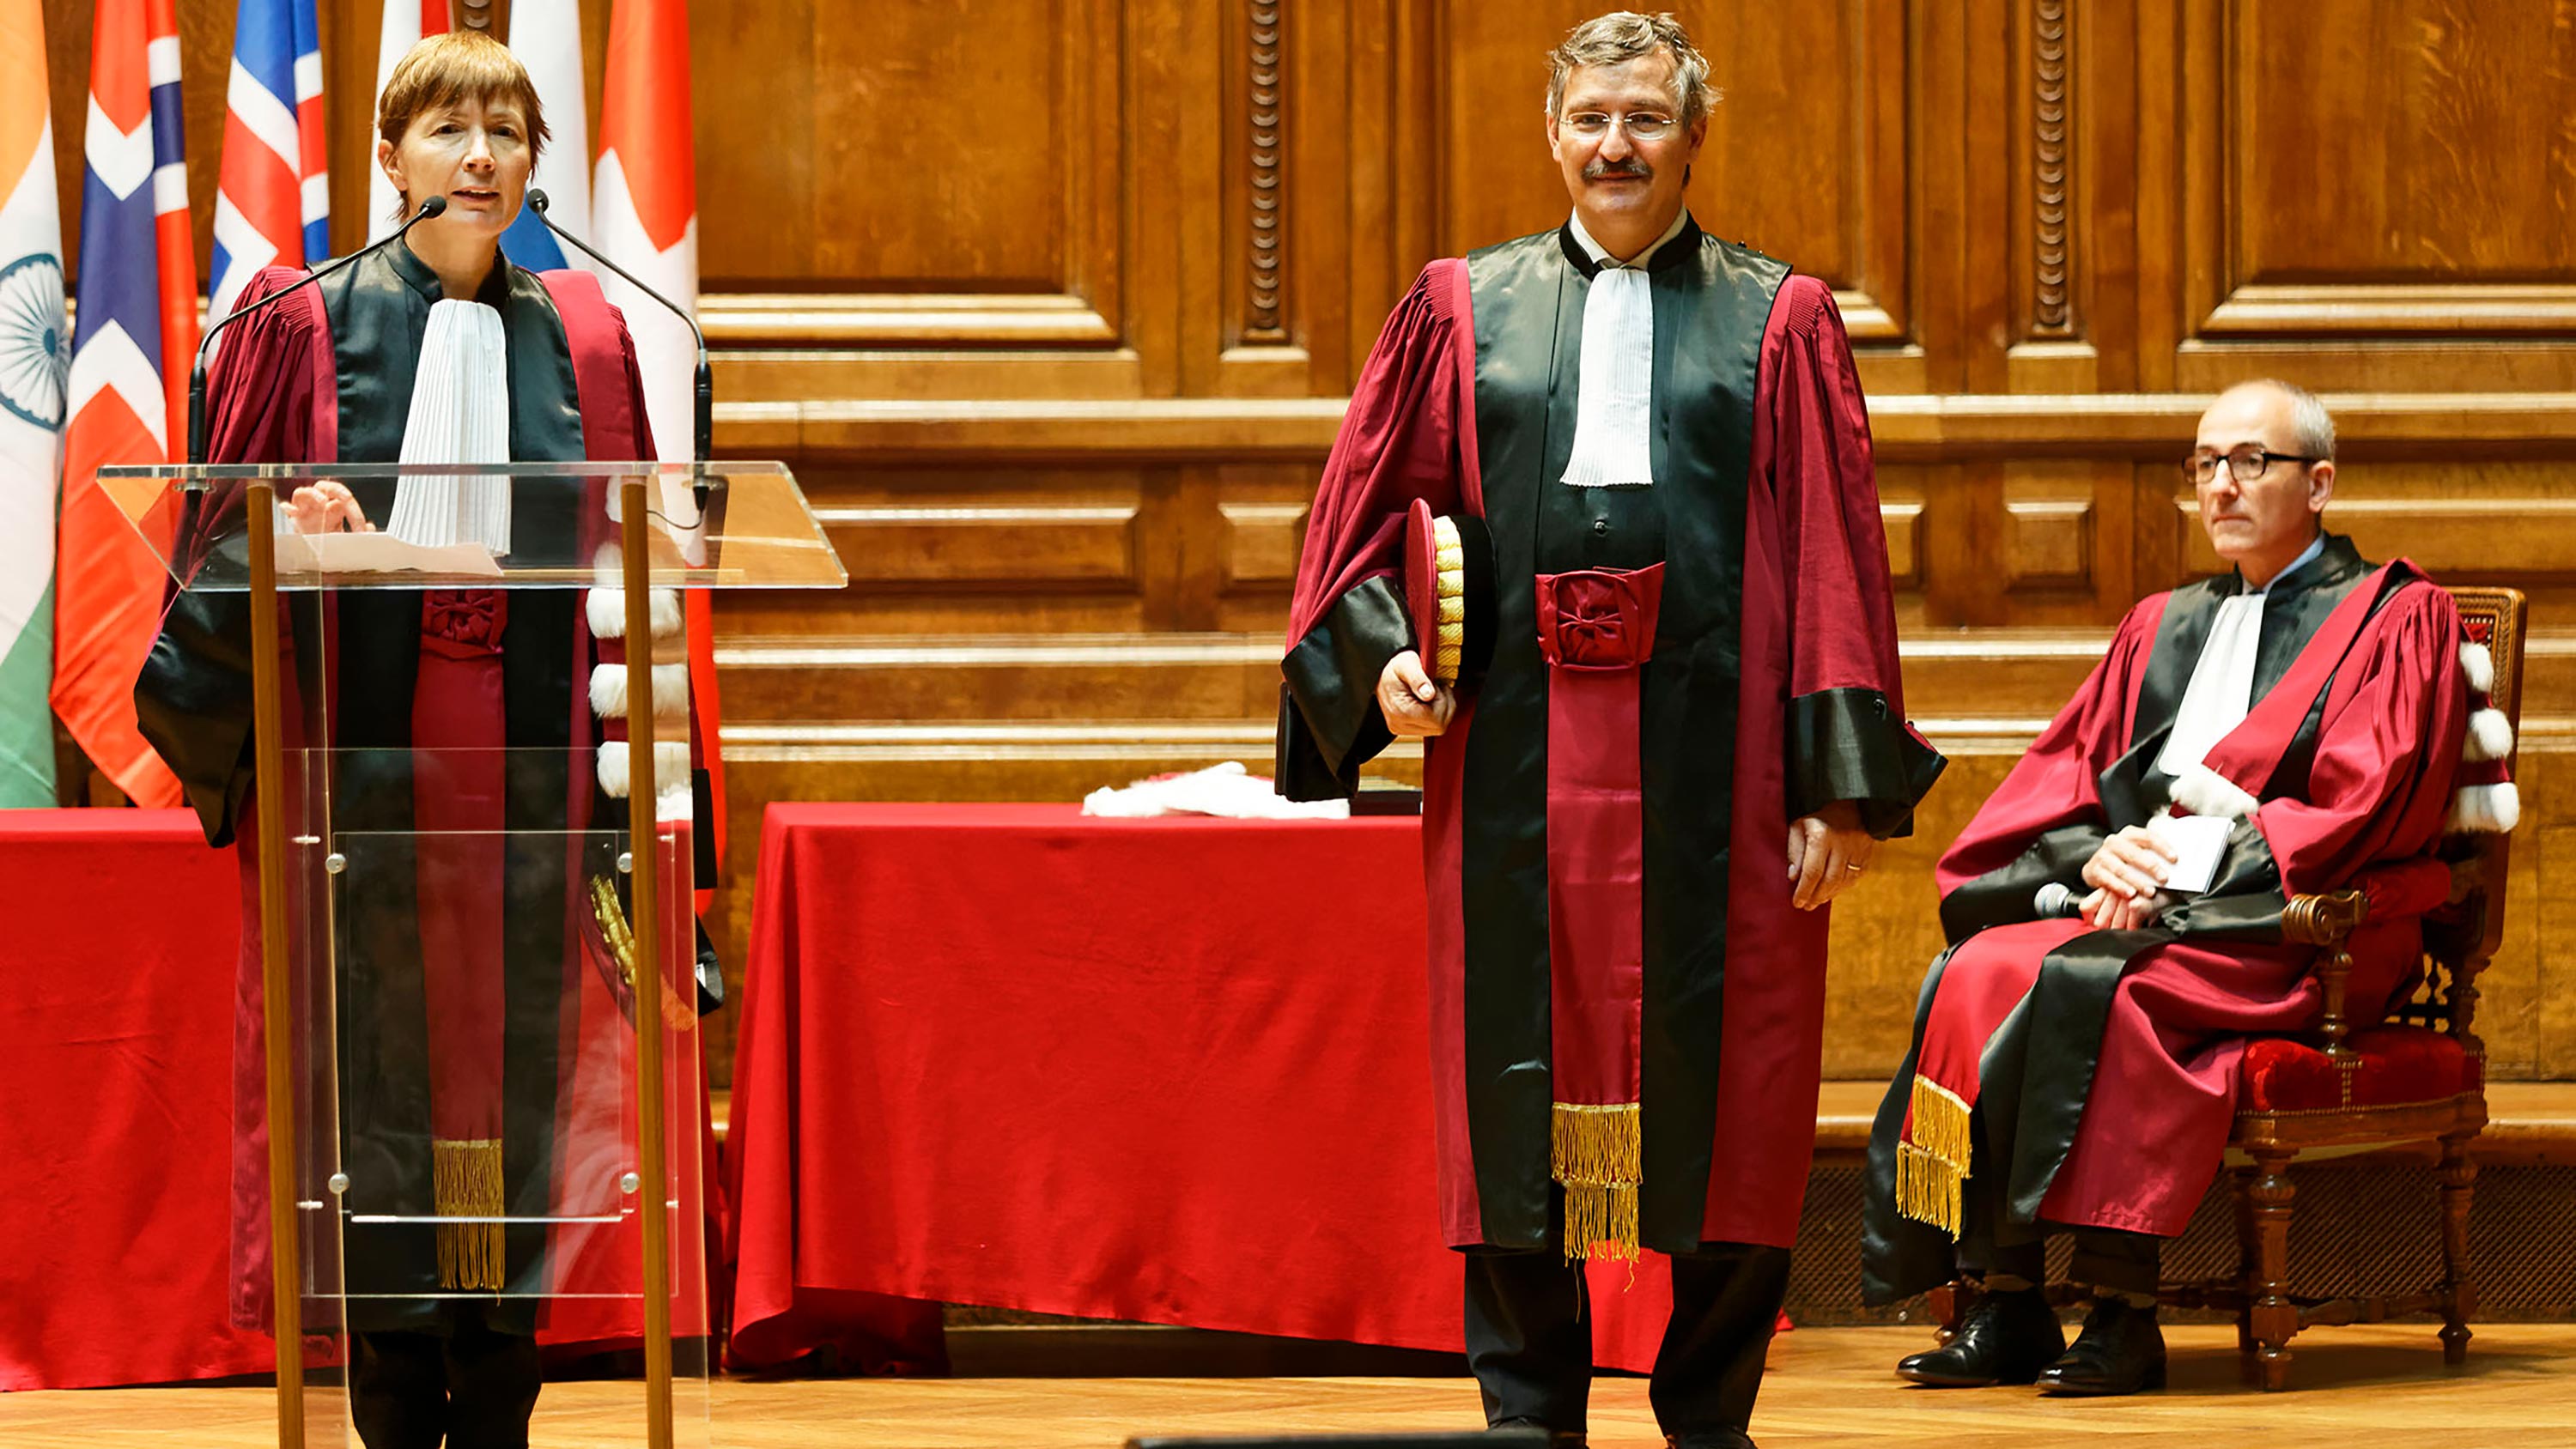 <p>Pomp and circumstance: In October 2016, Michael Hengartner was awarded the title of Doctor honoris causa at the&nbsp;Universit&eacute; Pierre et Marie Curie (today:&nbsp;Paris-Sorbonne) for his services to academia.</p> (Image: Used with permission)